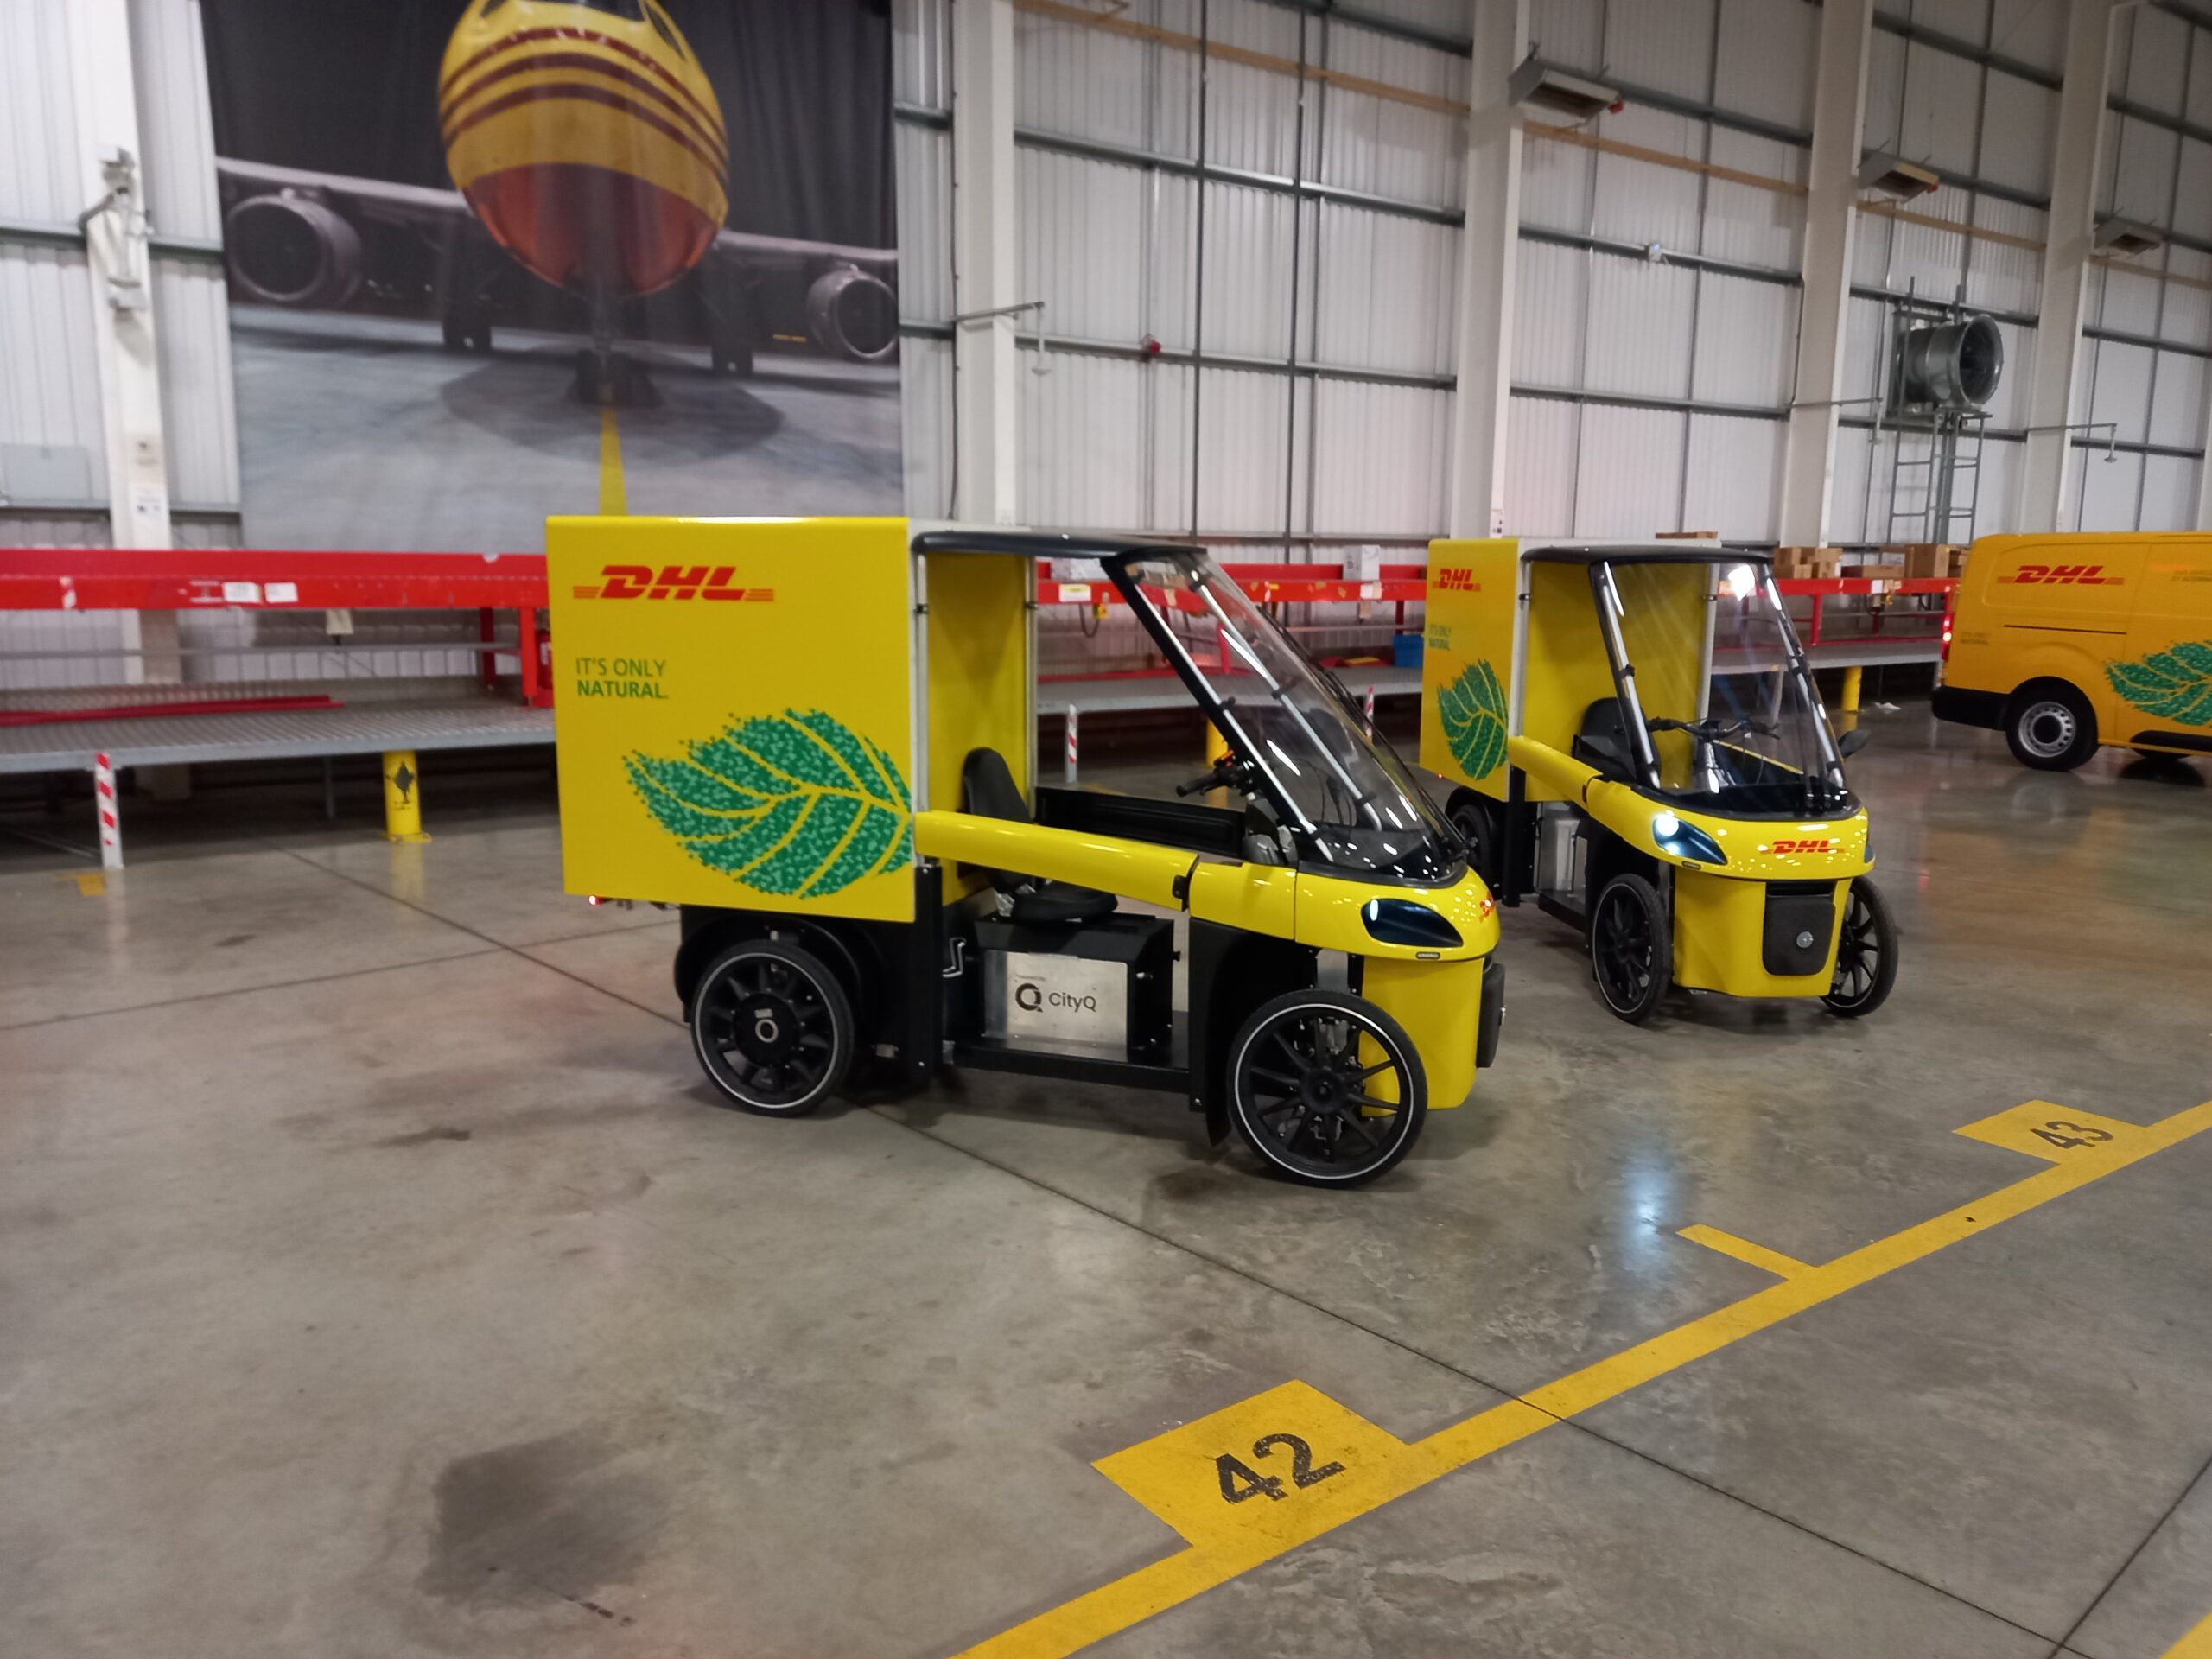 DHL rolls out chain-less CityQ ebikes for last mile deliveries